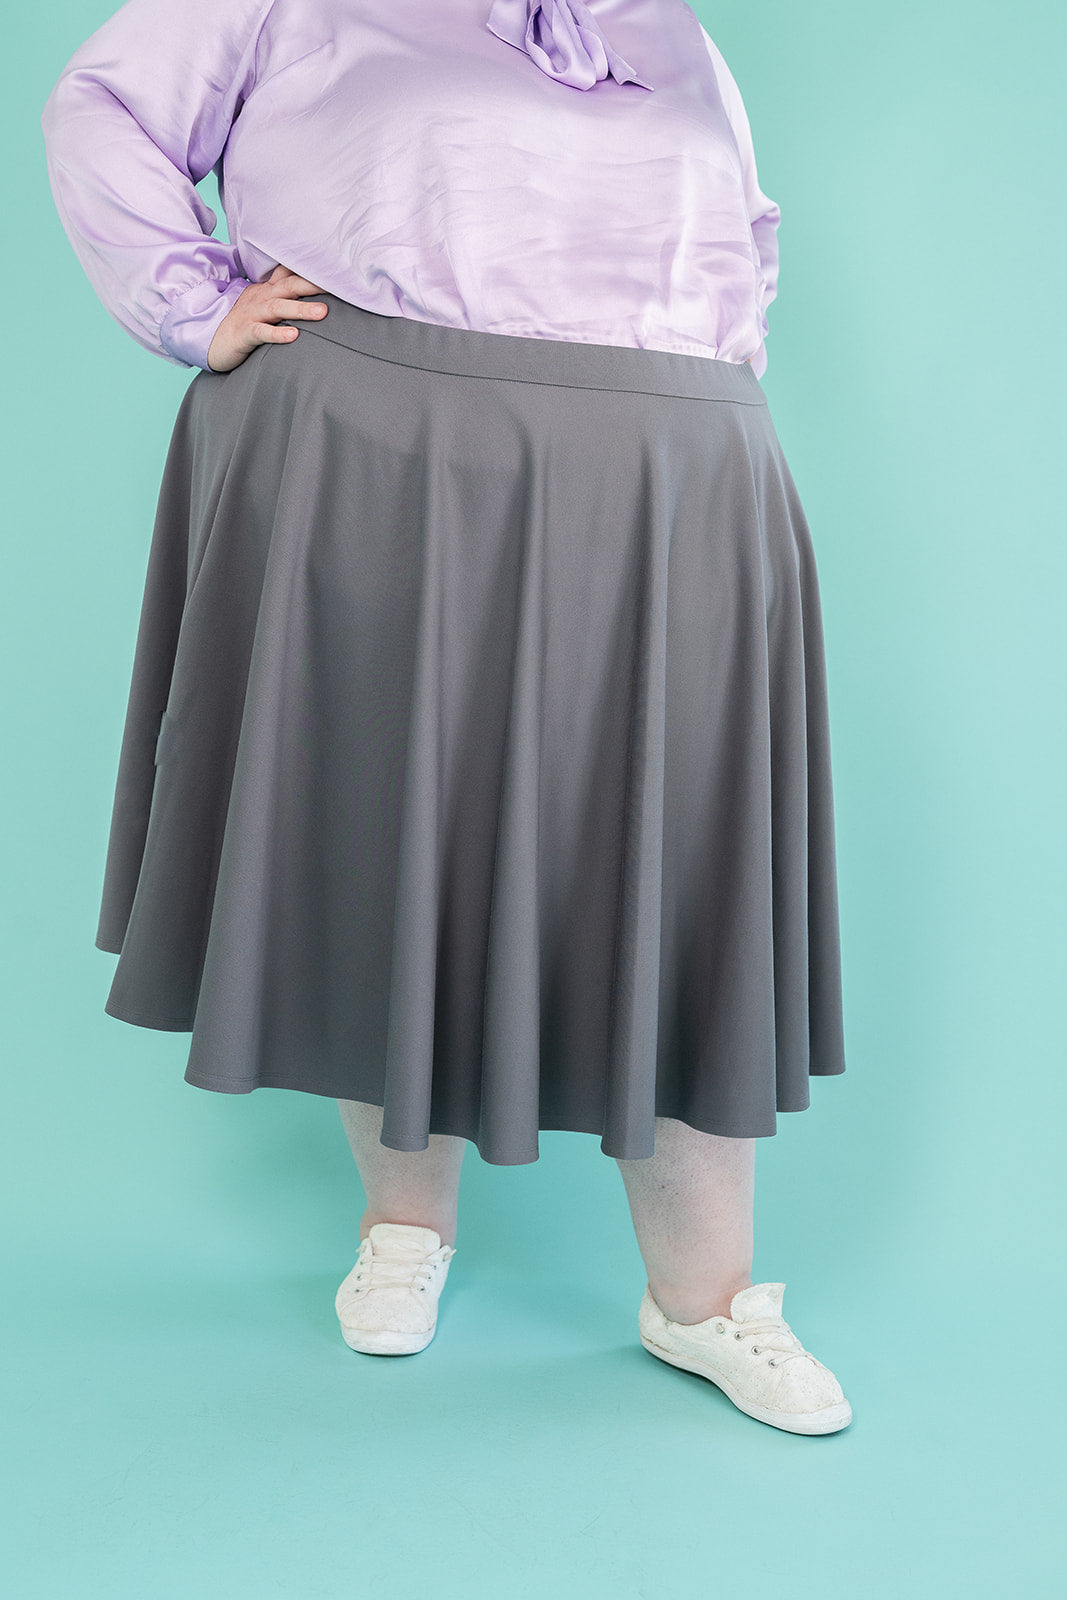 Photo of plus-size woman from shoulders down; she is wearing a lilac coloured blouse and grey skirt with white running shoes